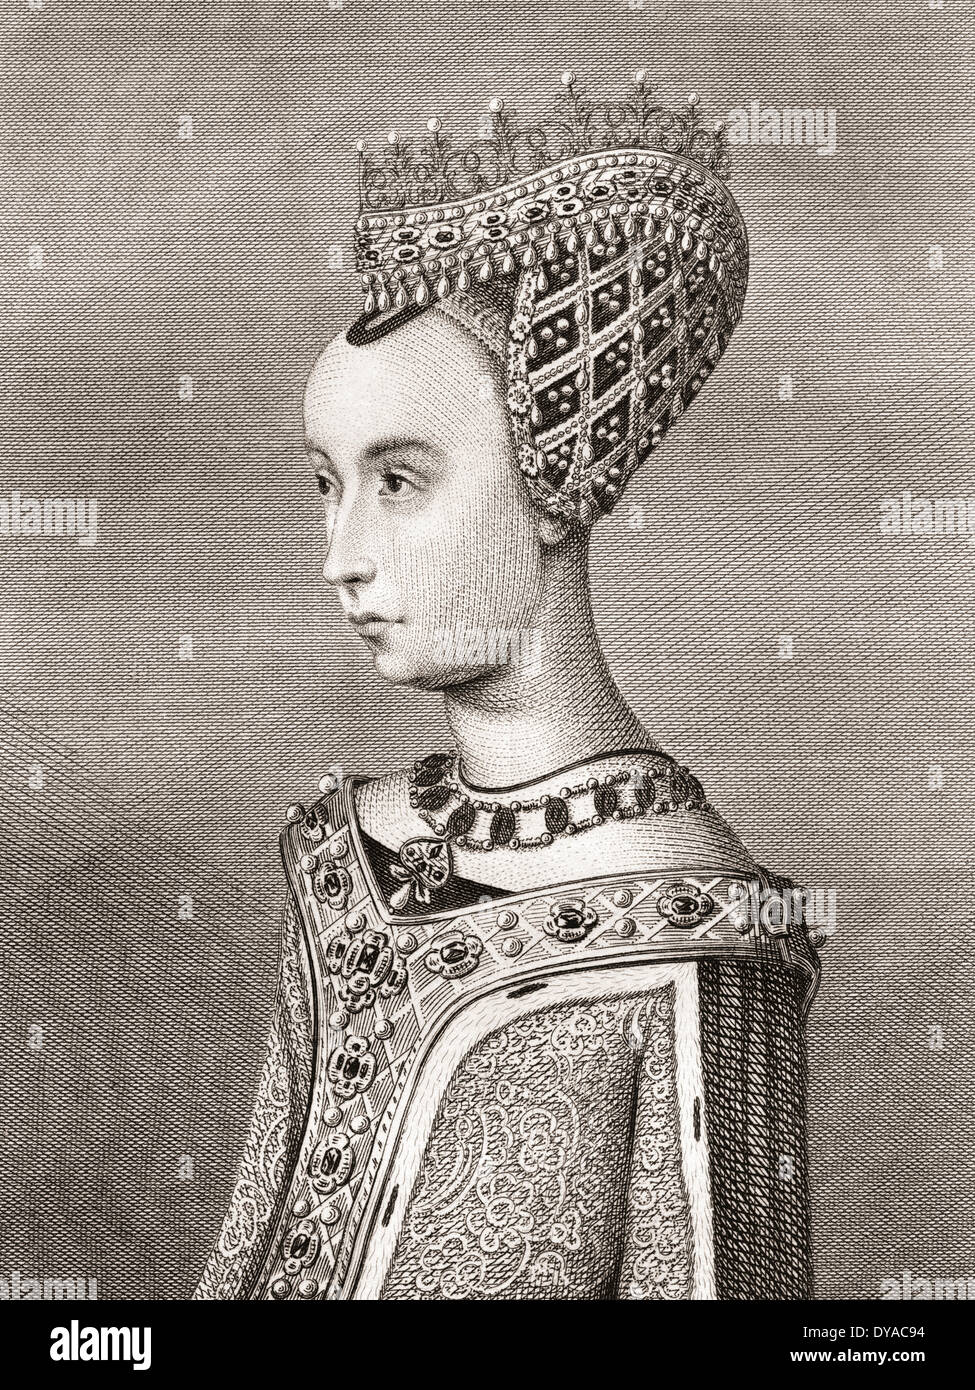 Margaret of Denmark, 1456 – 1486, aka Margaret of Norway. Queen of Scotland from 1469 to 1486 as the wife of King James III. Stock Photo